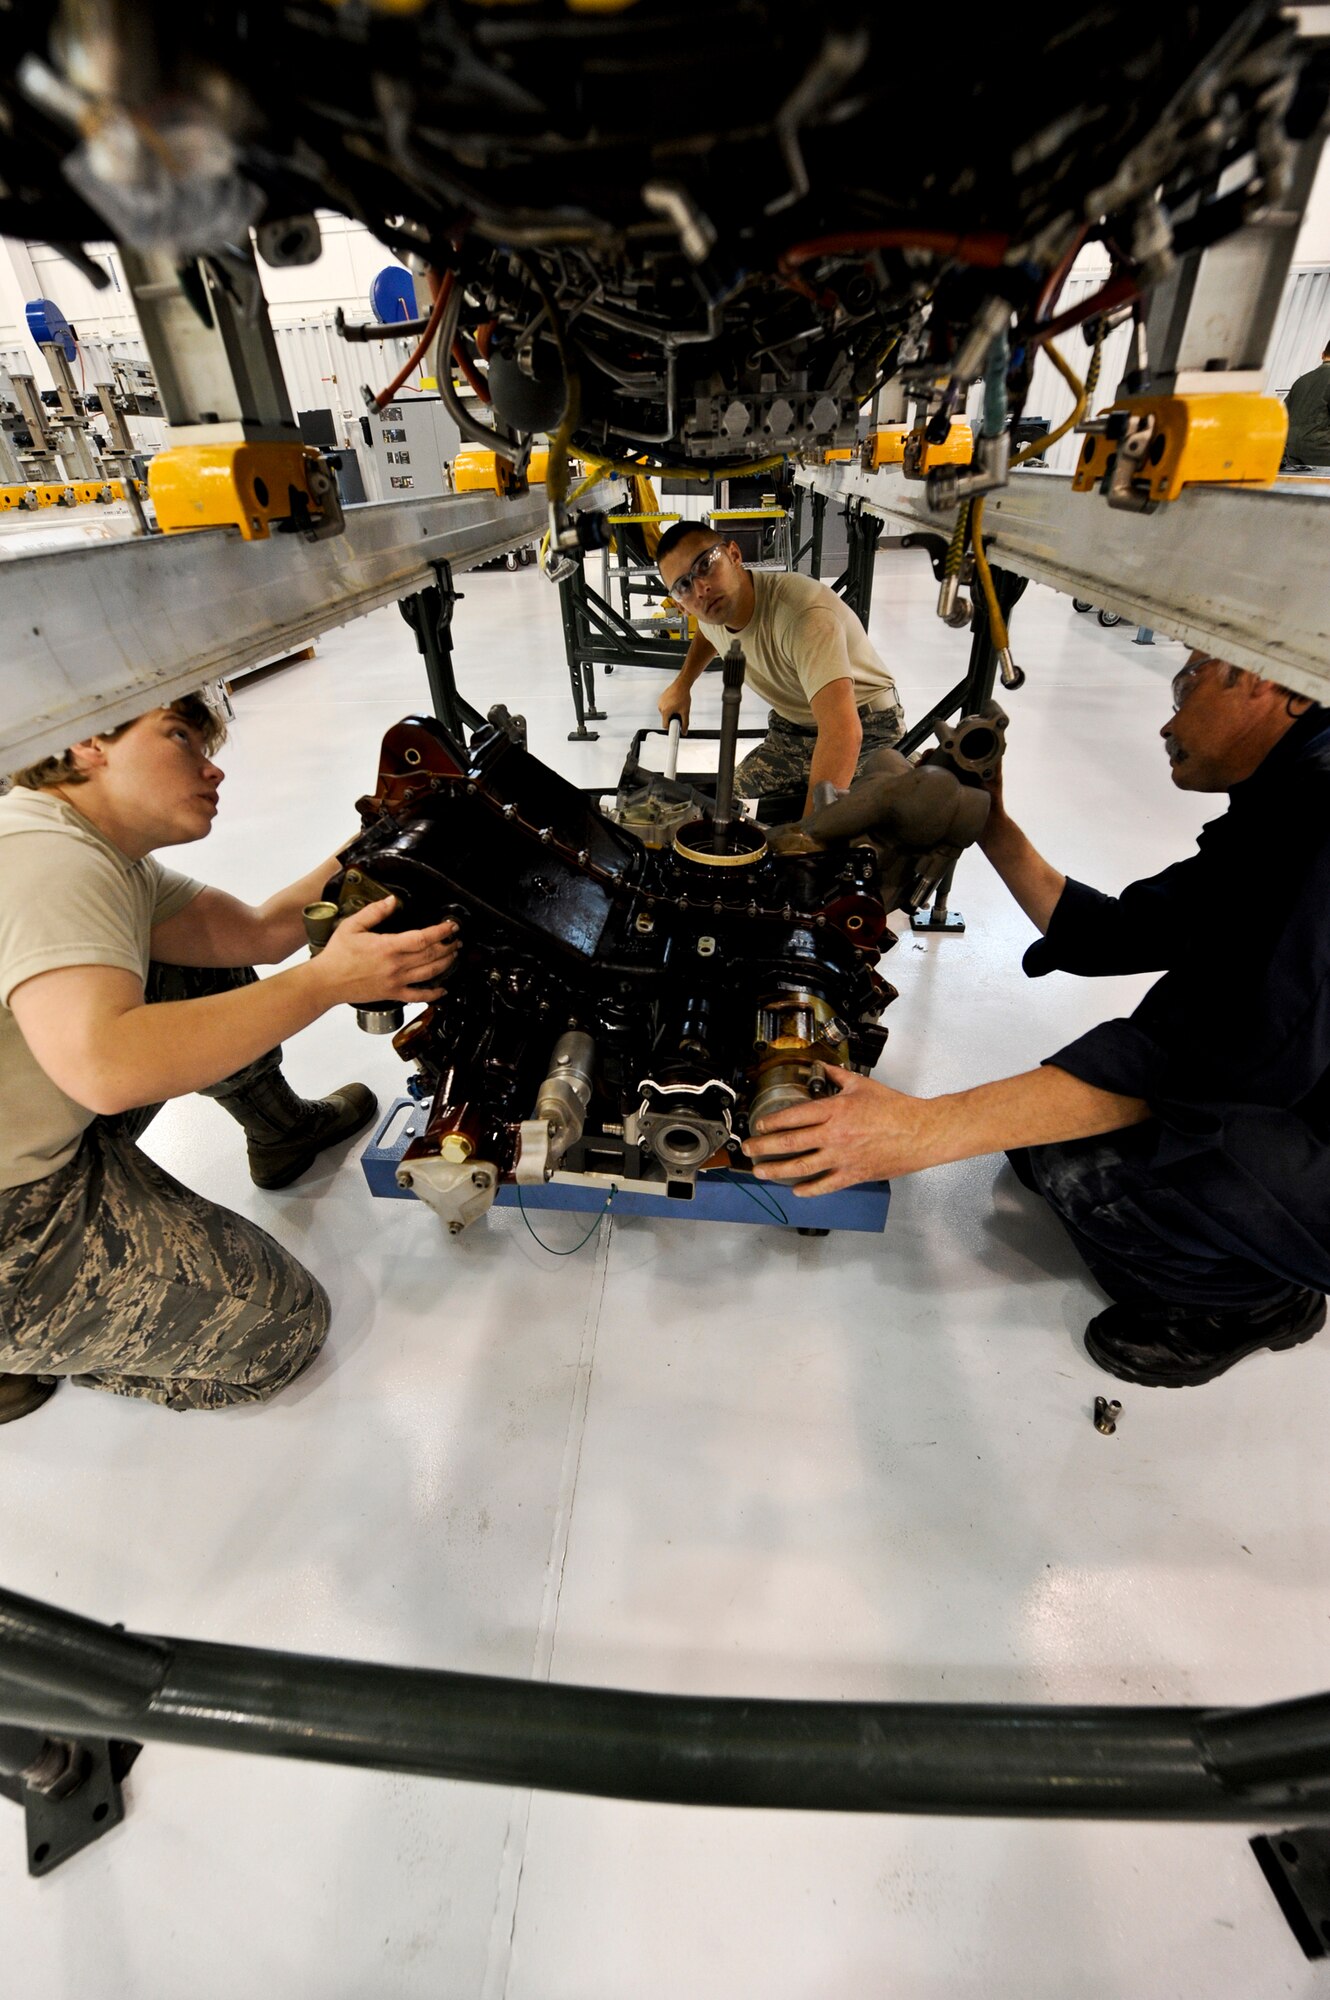 JOINT BASE ELMENDORF-RICHARDSON, Alaska – From left to right, Tech Sgt. Candice Schouten, Airman 1st Class Justin Bleich and Randy Grueneberg, all of the 3rd Component Maintenance Squadron Propulsion Flight, install the gearbox on an F-22 Raptor F119-PW-100 engine Aug. 6. The 3rd CMS was recently named the recipients of the 2010 Secretary of Defense Field-Level Maintenance Award, small category. (Air Force photo by Airman 1st Class Christopher Gross)